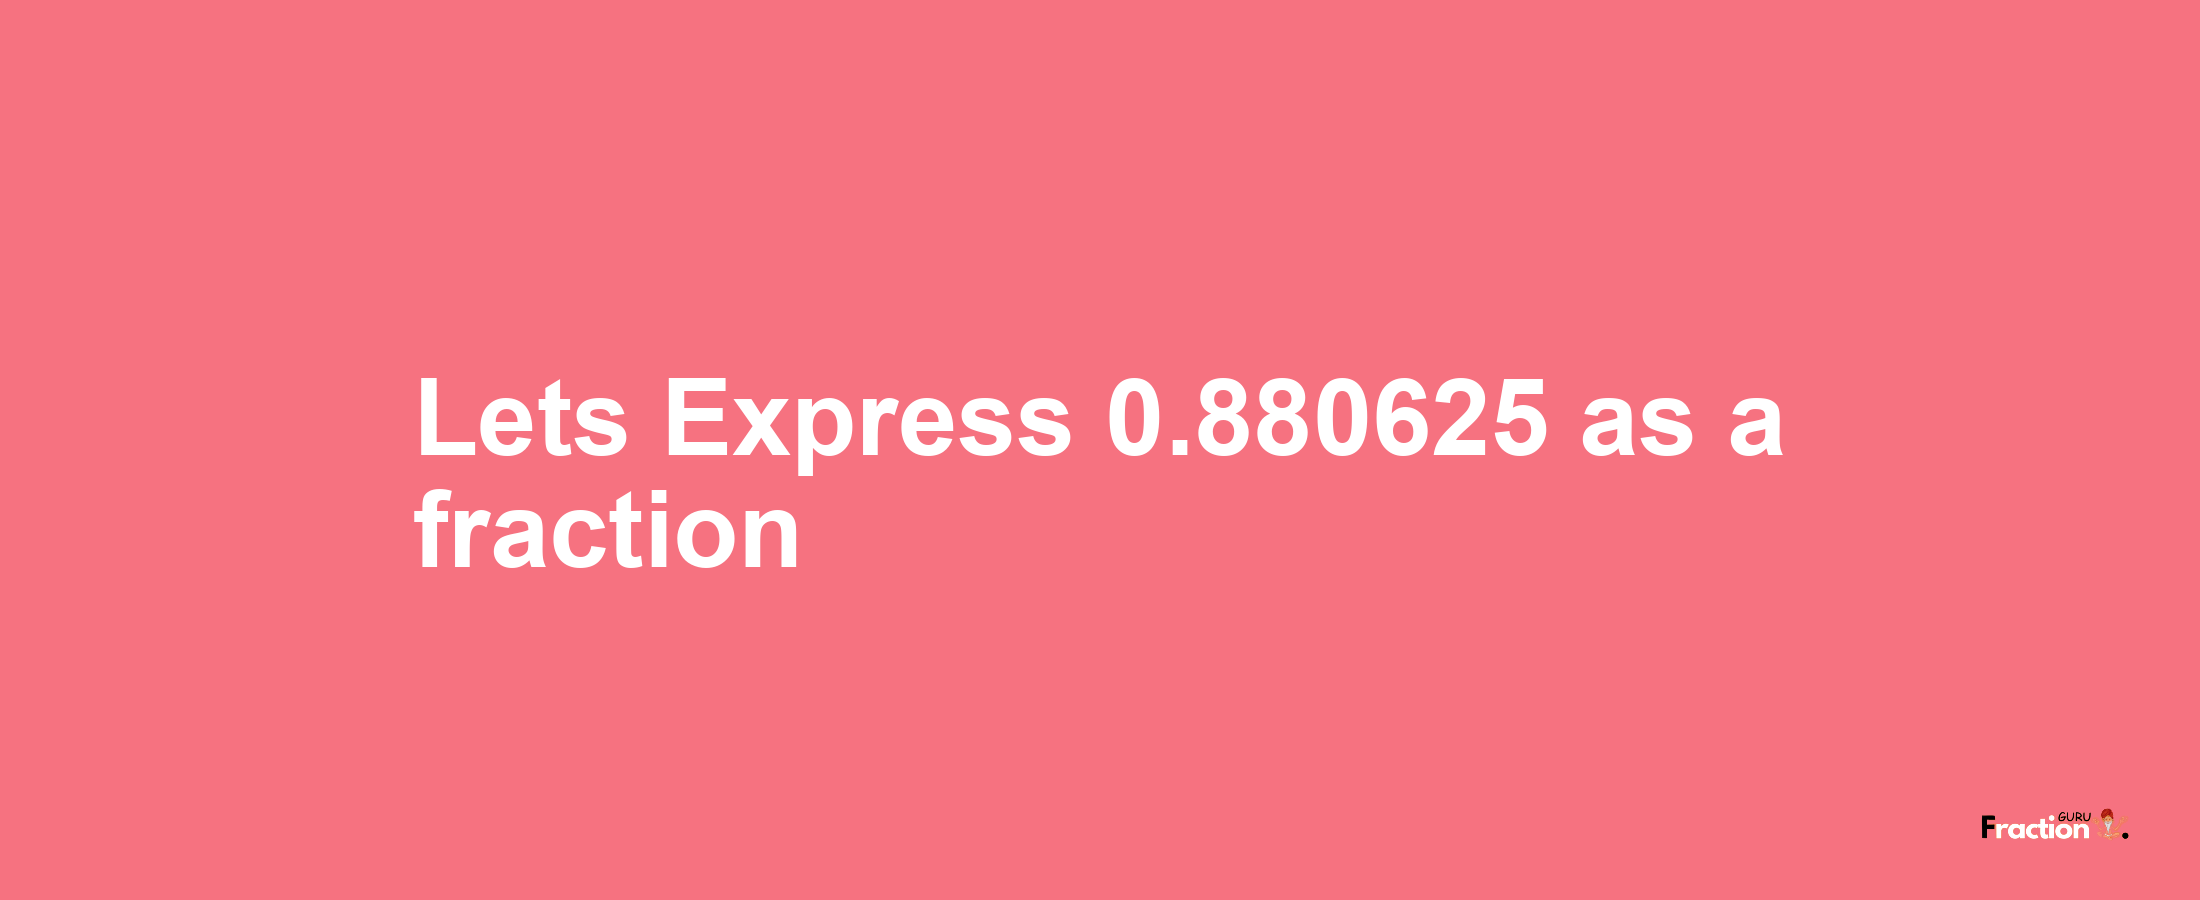 Lets Express 0.880625 as afraction